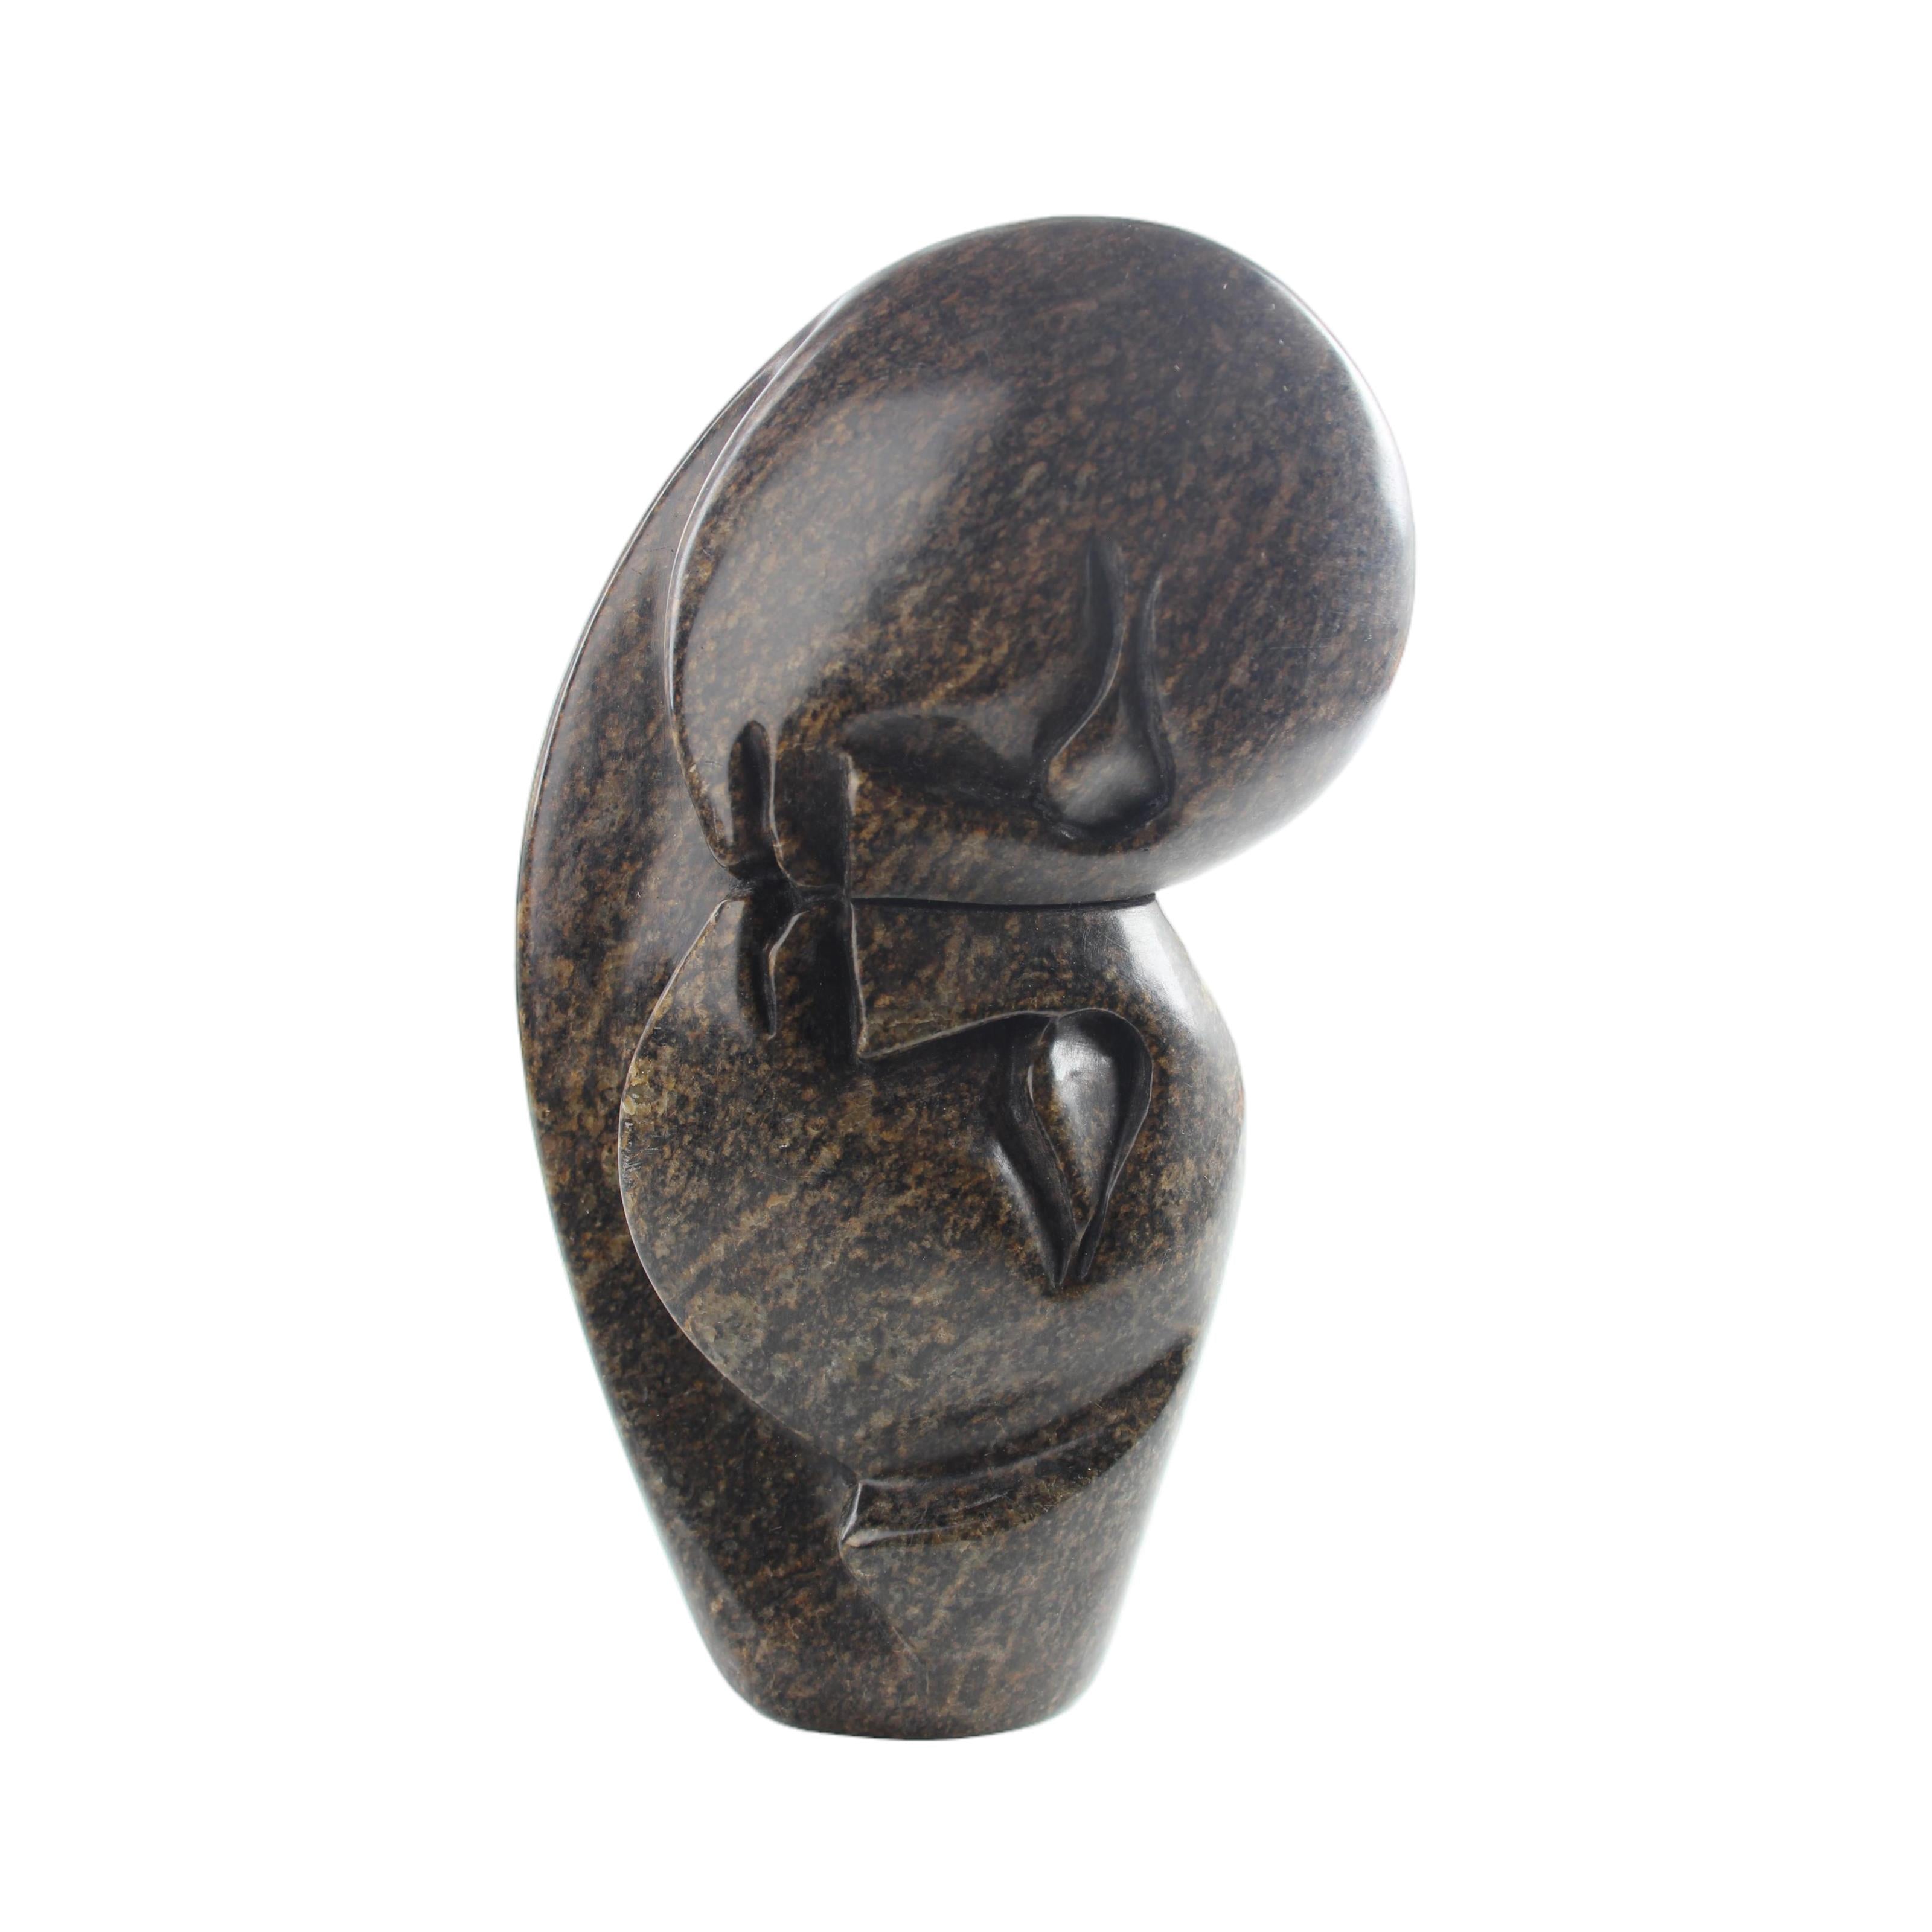 Shona Tribe Serpentine Stone Lovers ~8.3" Tall - Lovers